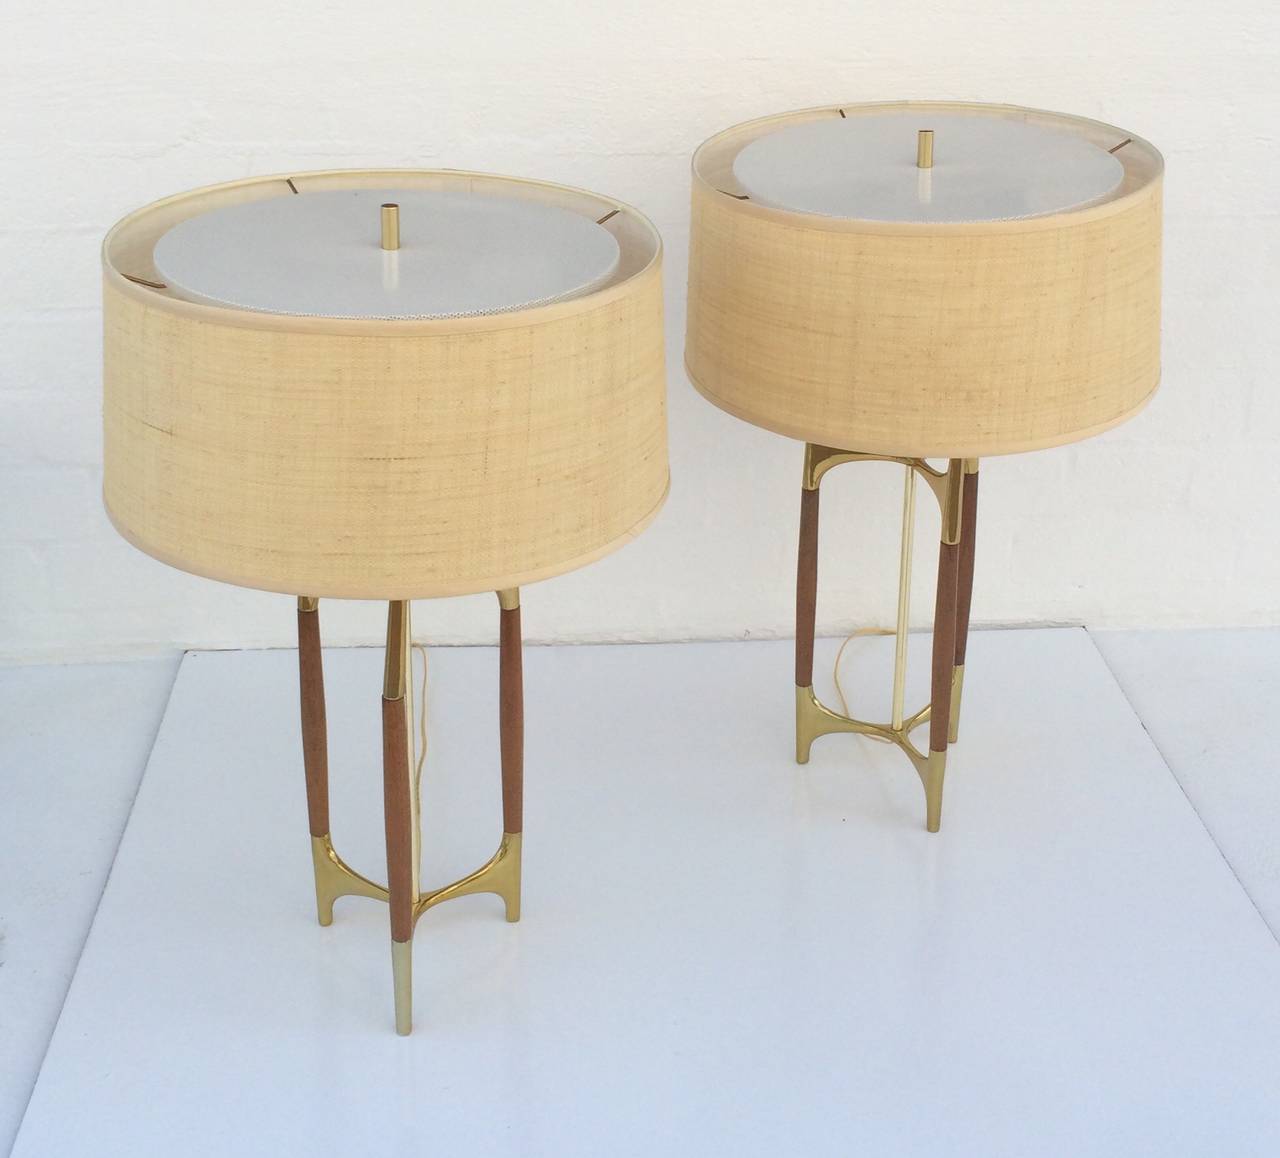 Polished Brass and Walnut Tables Lamps Designed by Gerald Thurston for Lightolier